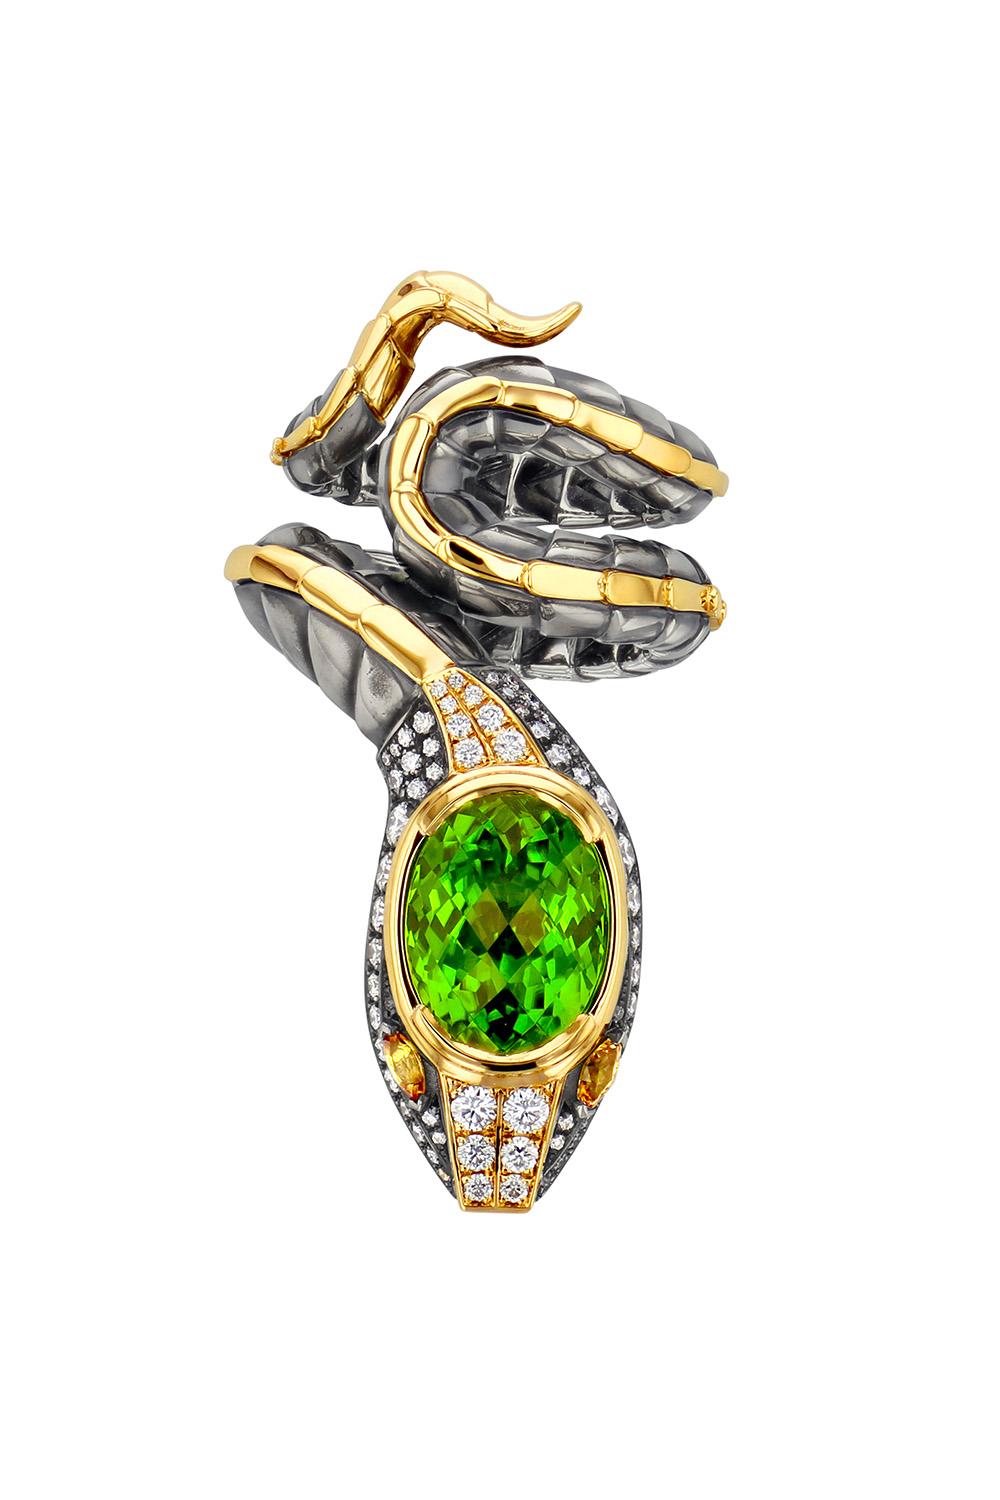 Yellow gold and distressed silver ring. The body, wrapped in distressed silver scales with a yellow gold dorsal ridge, ends with a head that is paved with diamonds and animated with yellow sapphire eyes. At its summit, it is set with an oval peridot